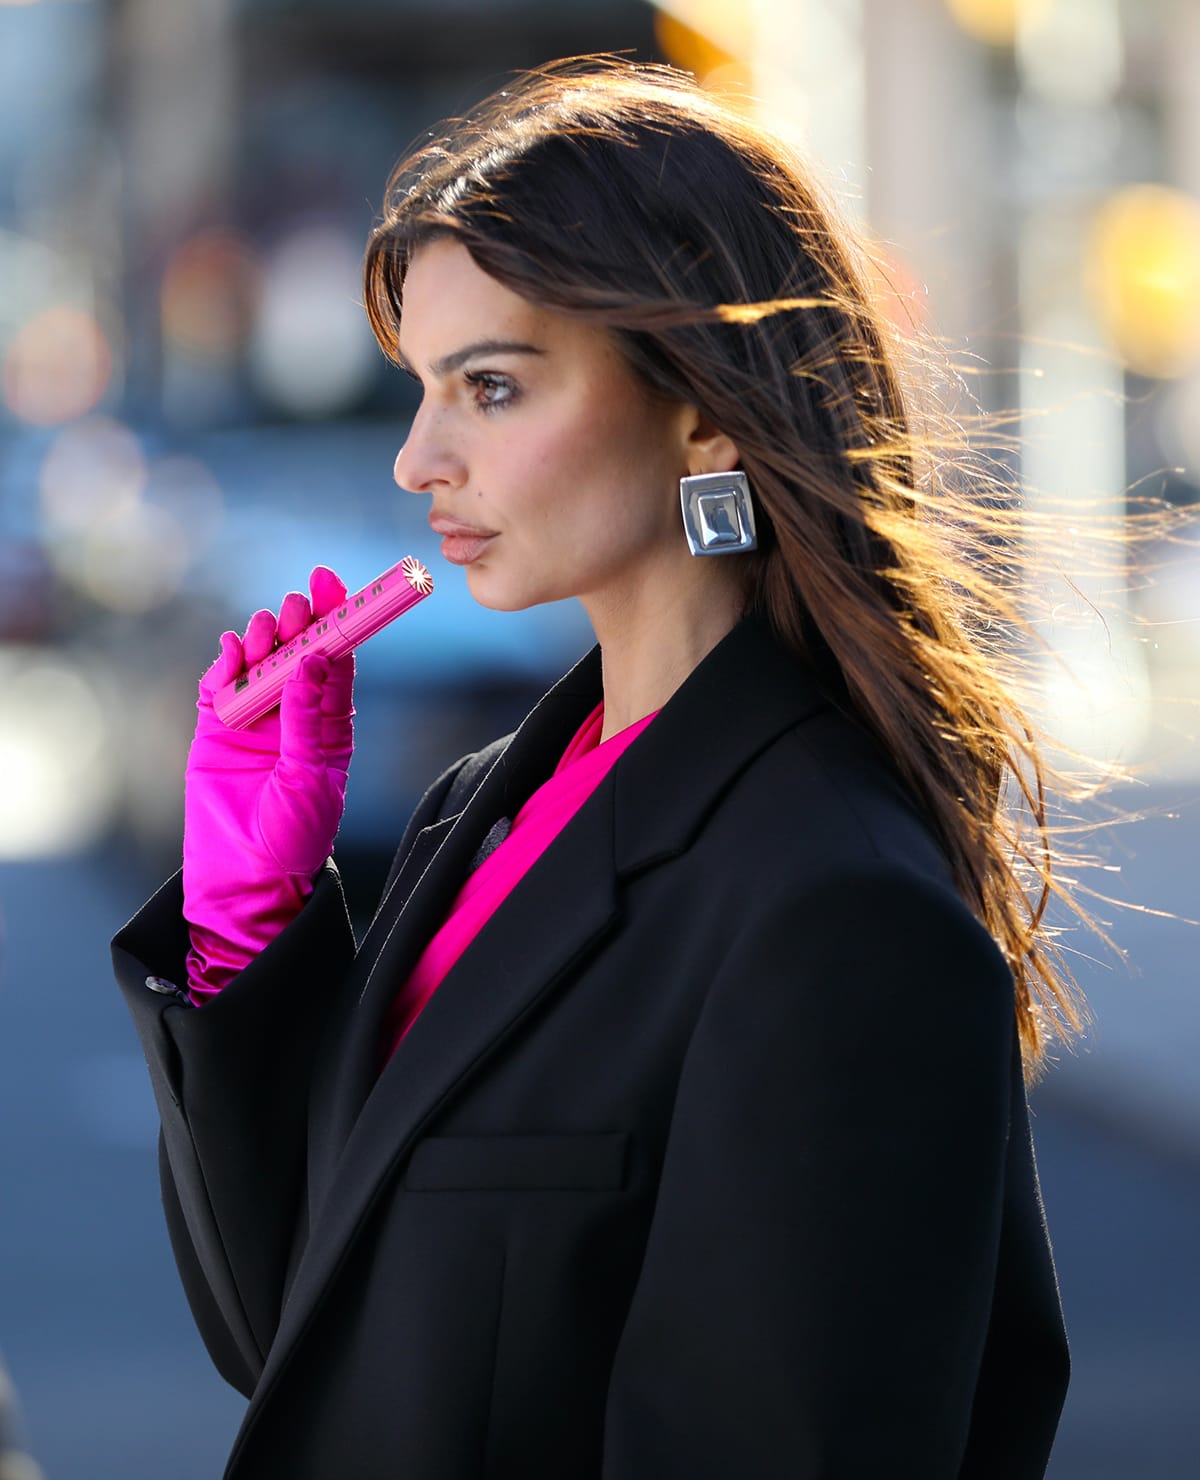 Emily Ratajkowski styles her traffic-stopping cutout jumpsuit with chunky Heaven Mayhem earrings and highlights her features with fake lashes and pink lip gloss